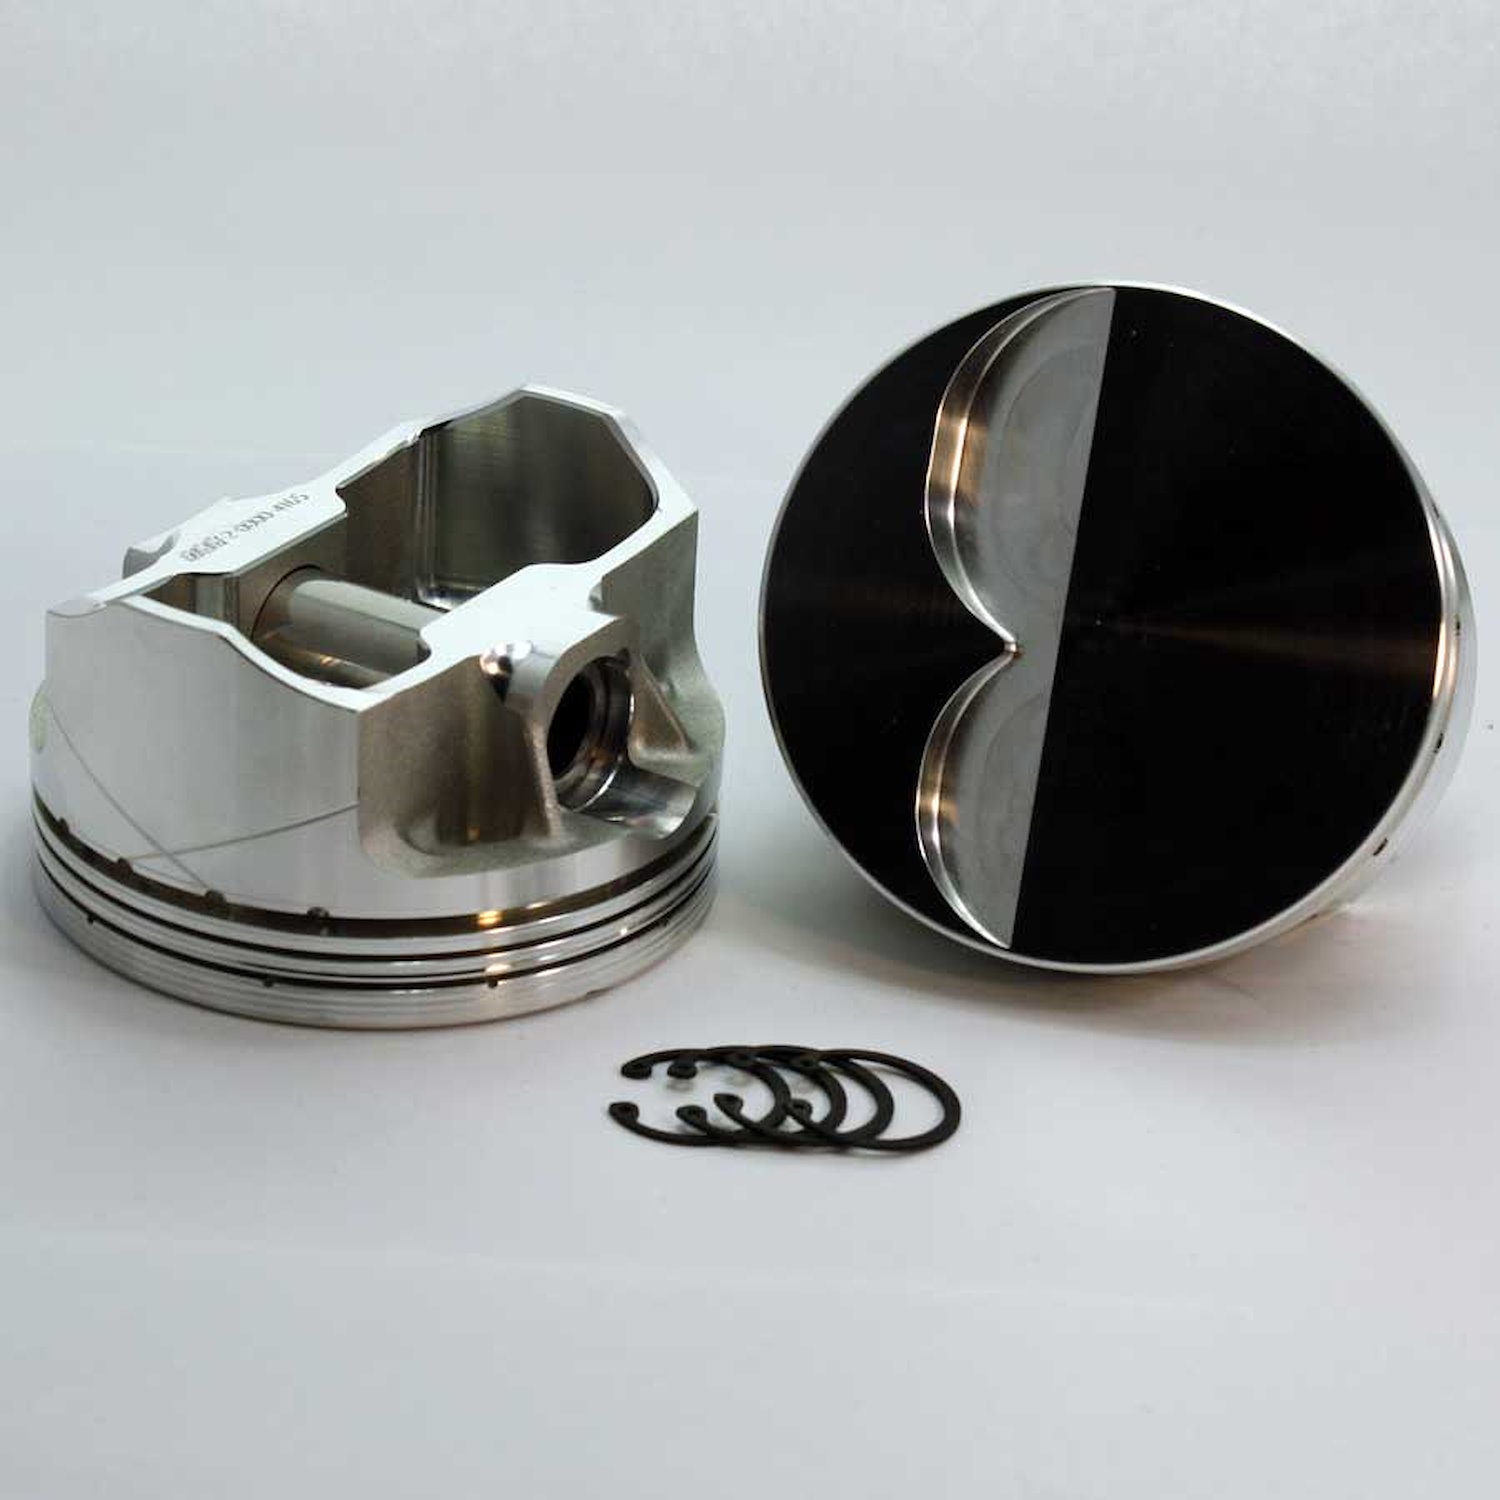 2-3400-4060 FX-Series Flat Top Piston Set for 1962-2001 Small Block Ford 289-302, 4.060 in. Bore, -4cc Volume [OEM Stroke]